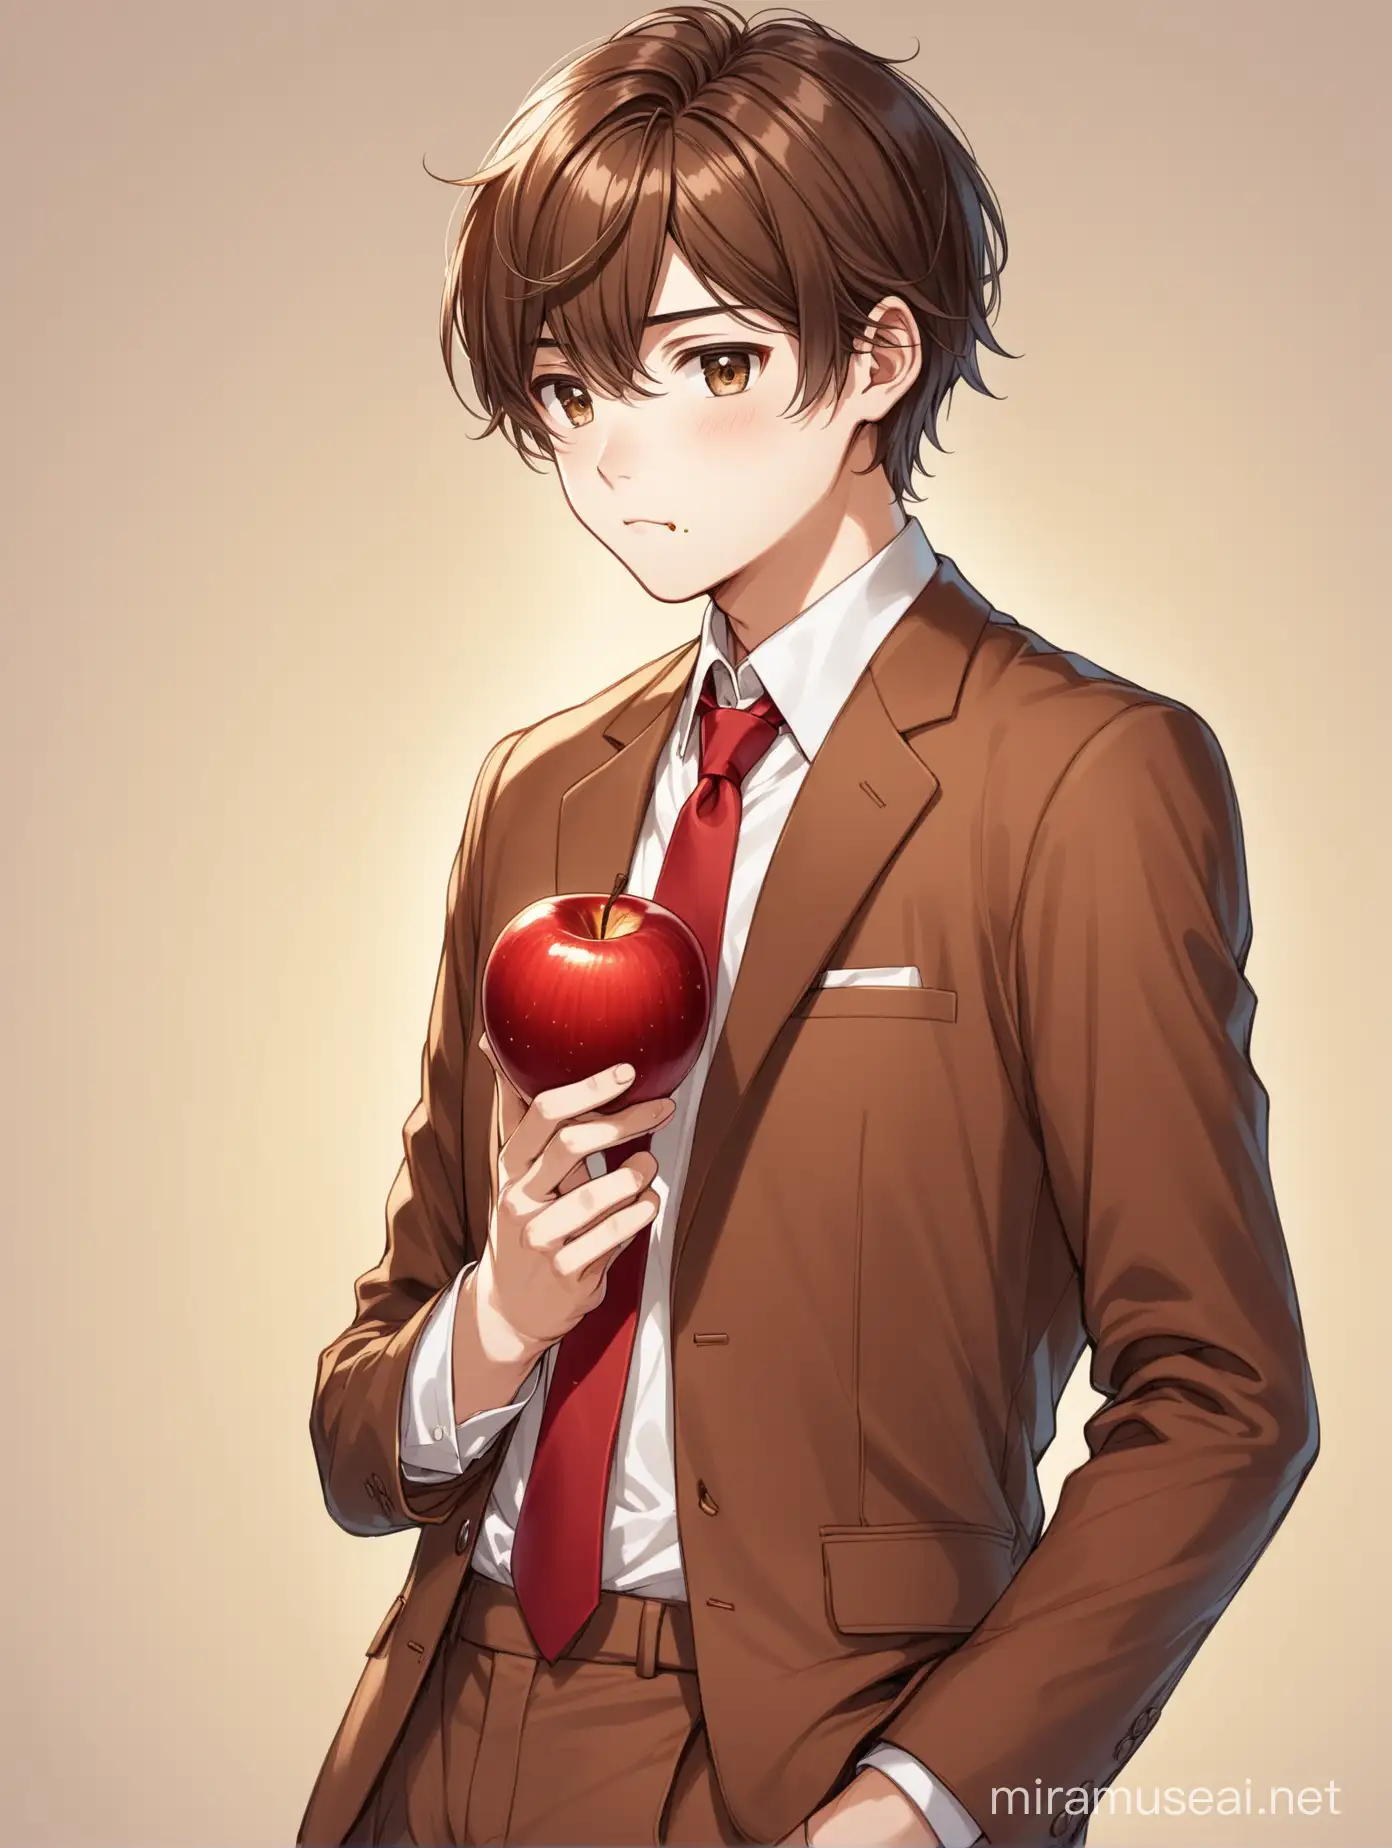 A handsome teenager with brown hair, brown eyes, and a sleepy look. He wears a white shirt, red tie, brown suit, brown pants, and brown shoes. He is eating a red apple.